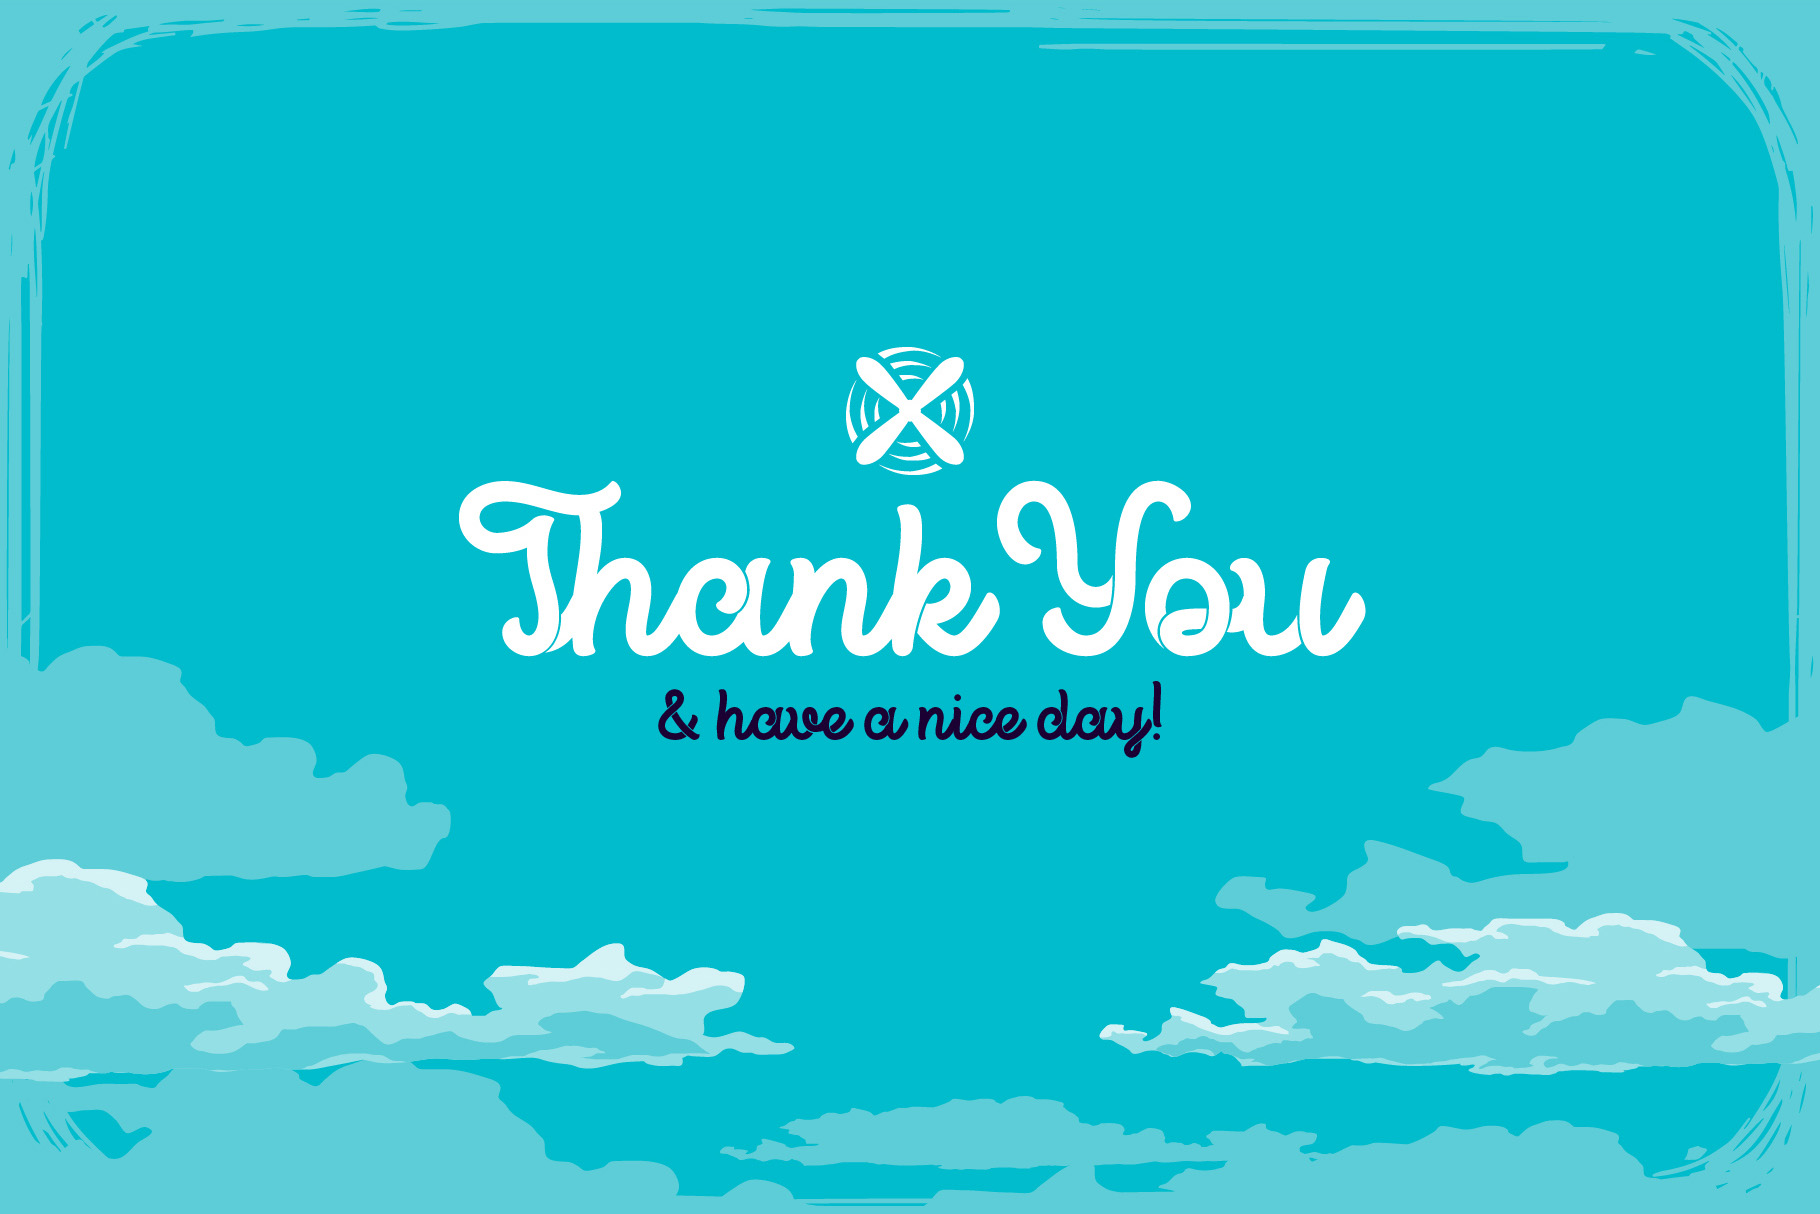 Thank you phrase using Propeller Font.